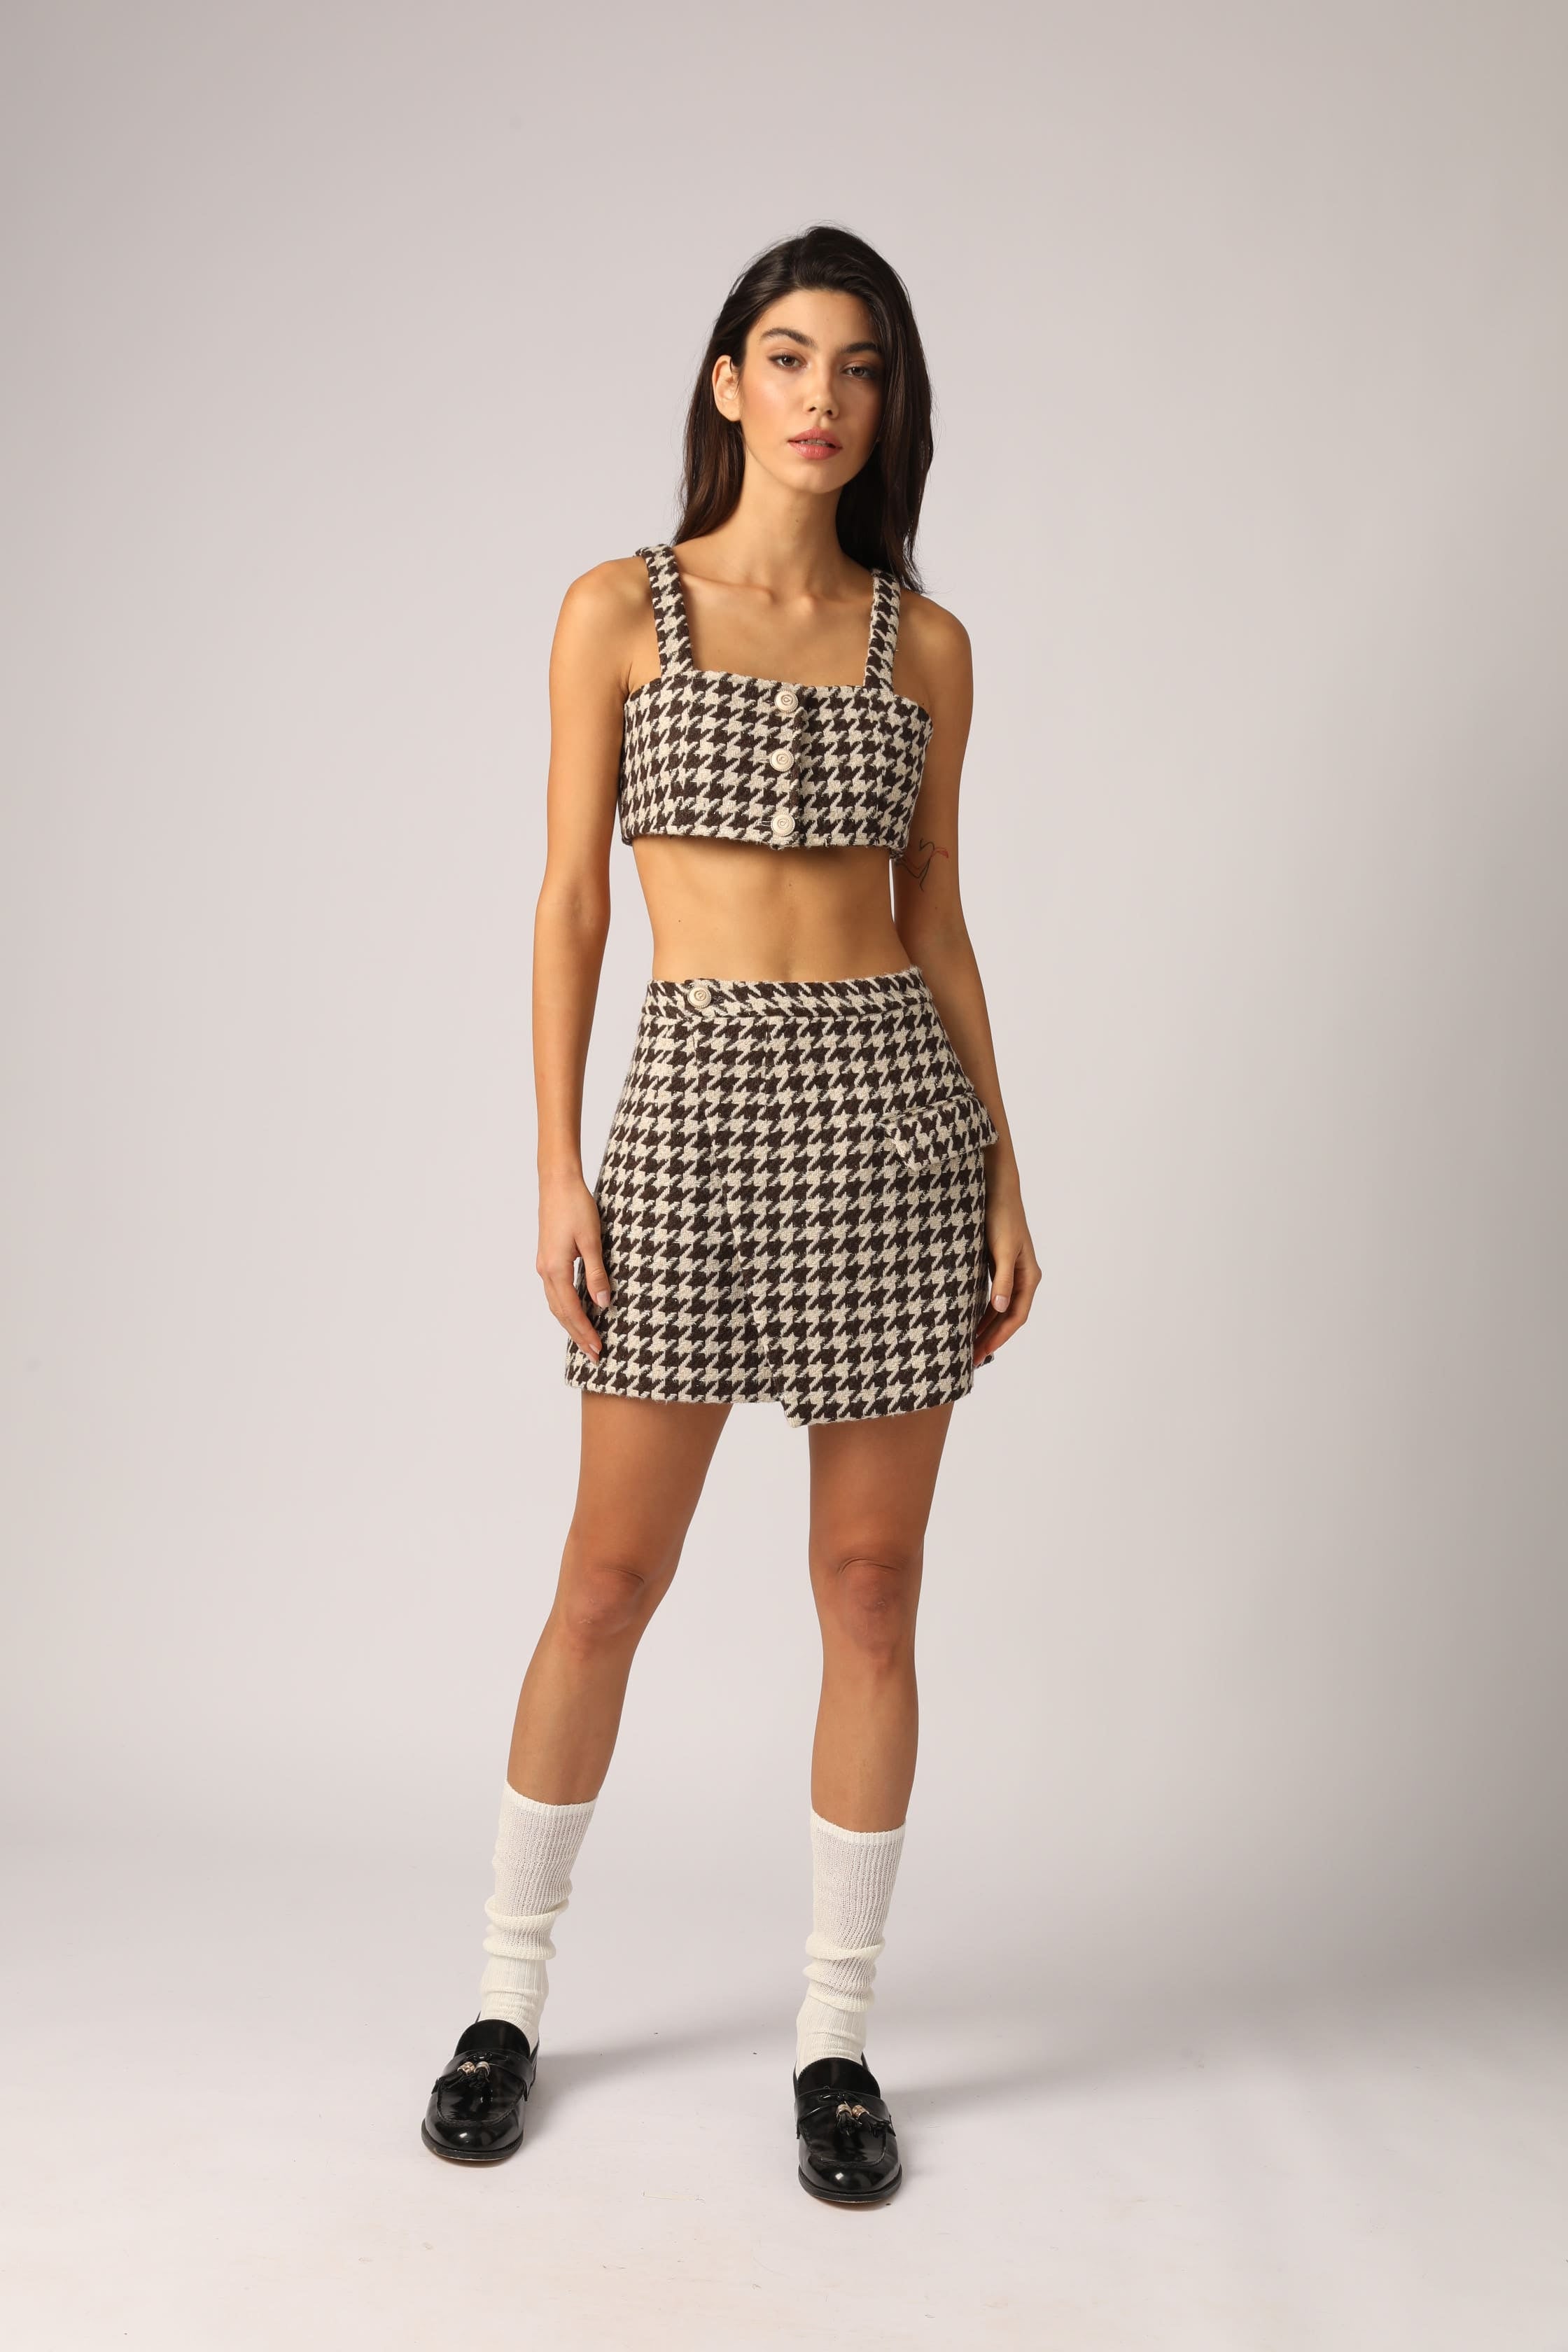 Beige Houndstooth Skirt - By Quaint